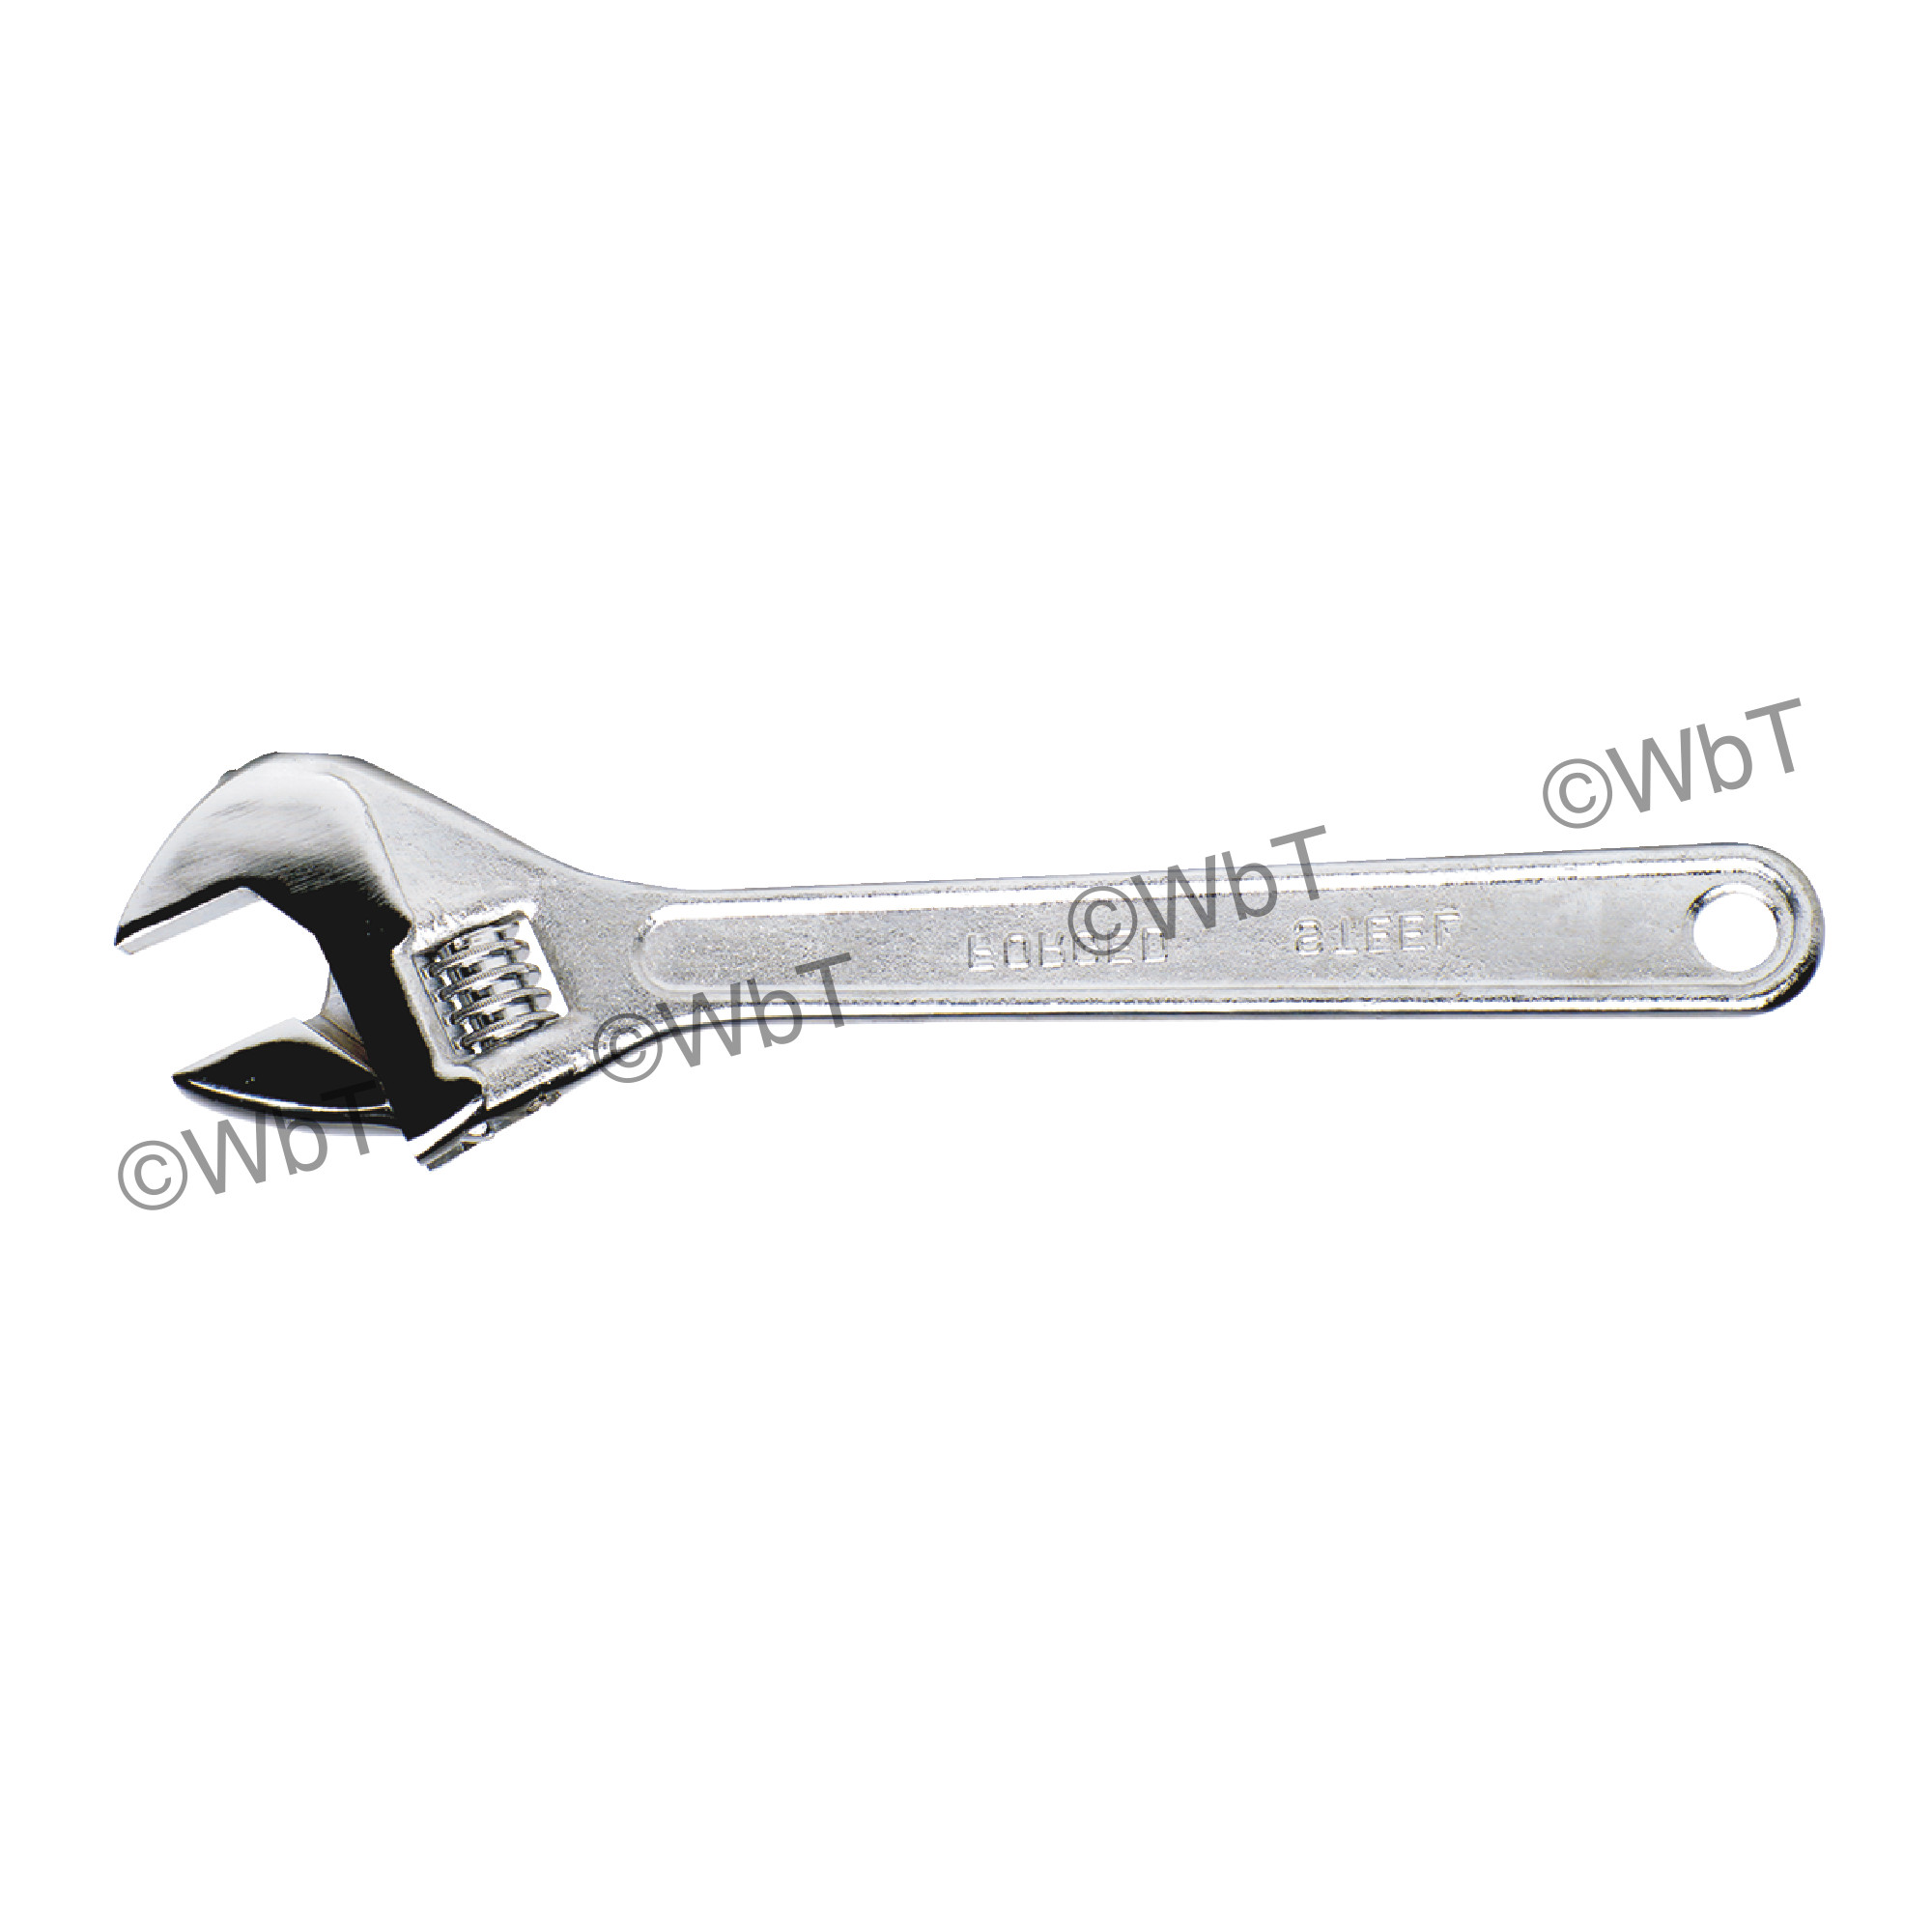 Adjustable Wrench - Model: 5033   SIZE: 10"   Capacity: 1-1/8"